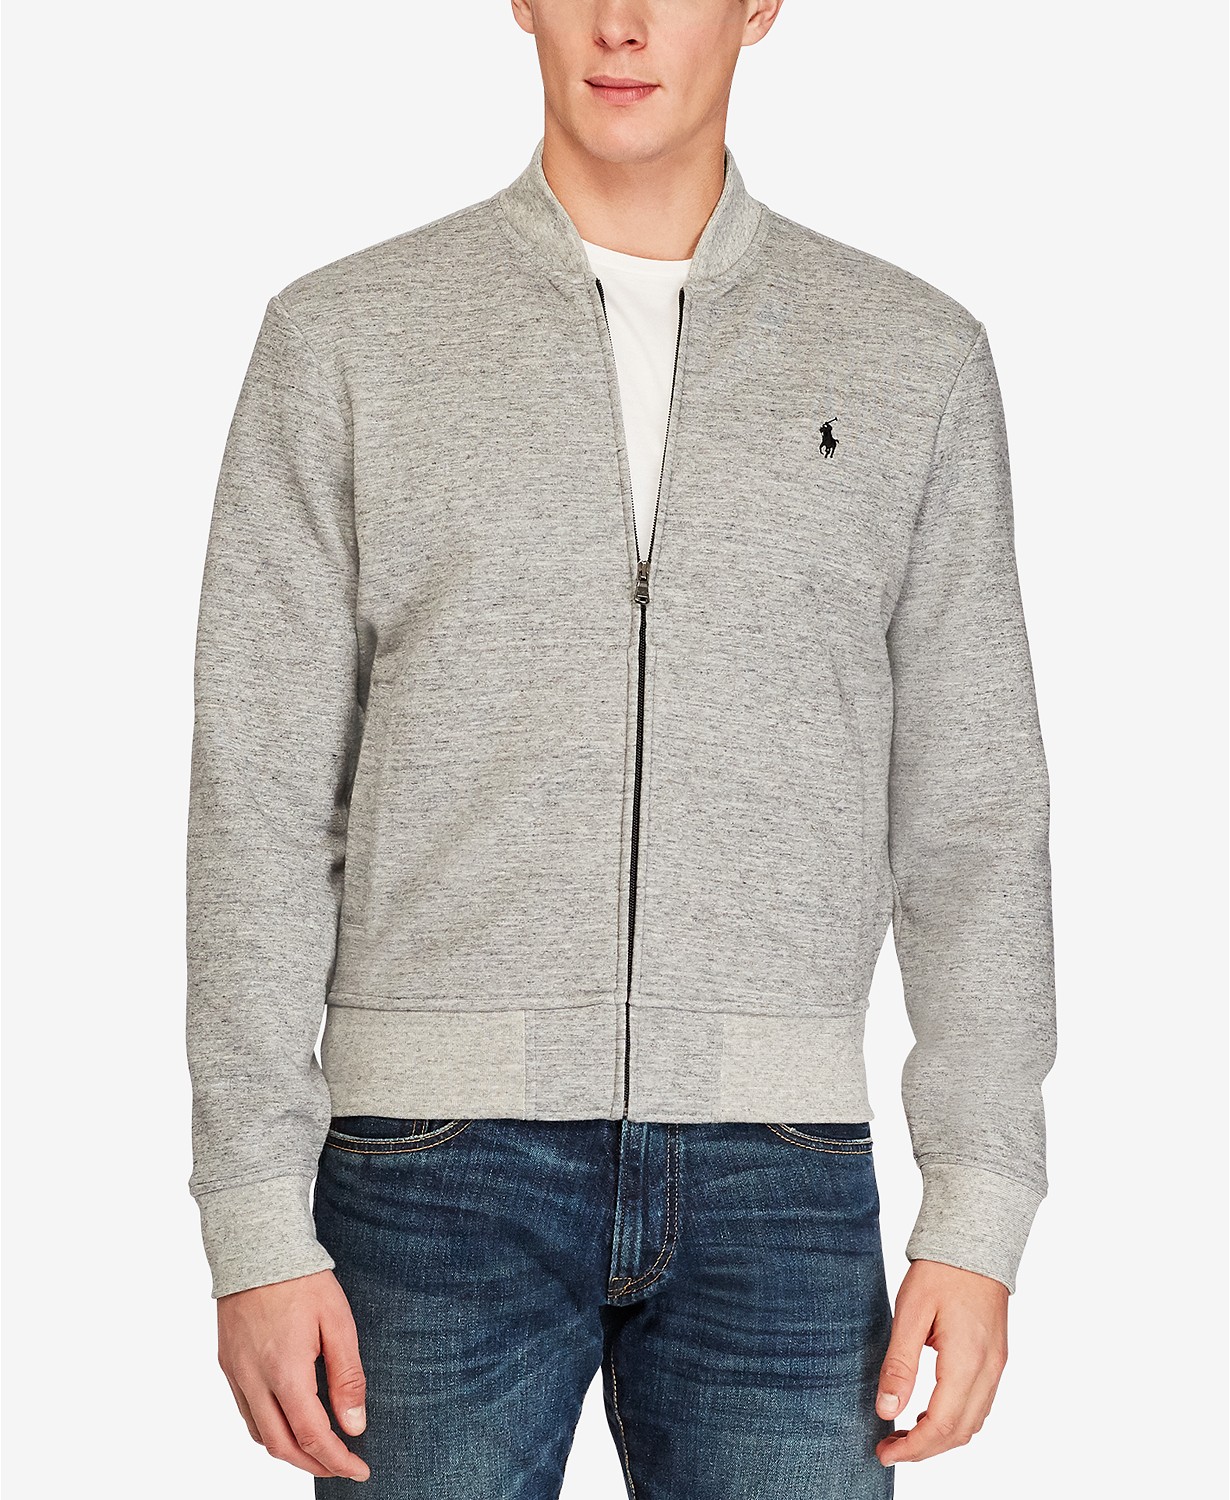 Polo Ralph Lauren Double-Knit Bomber Jacket on sale for $39.33 - Cop ...